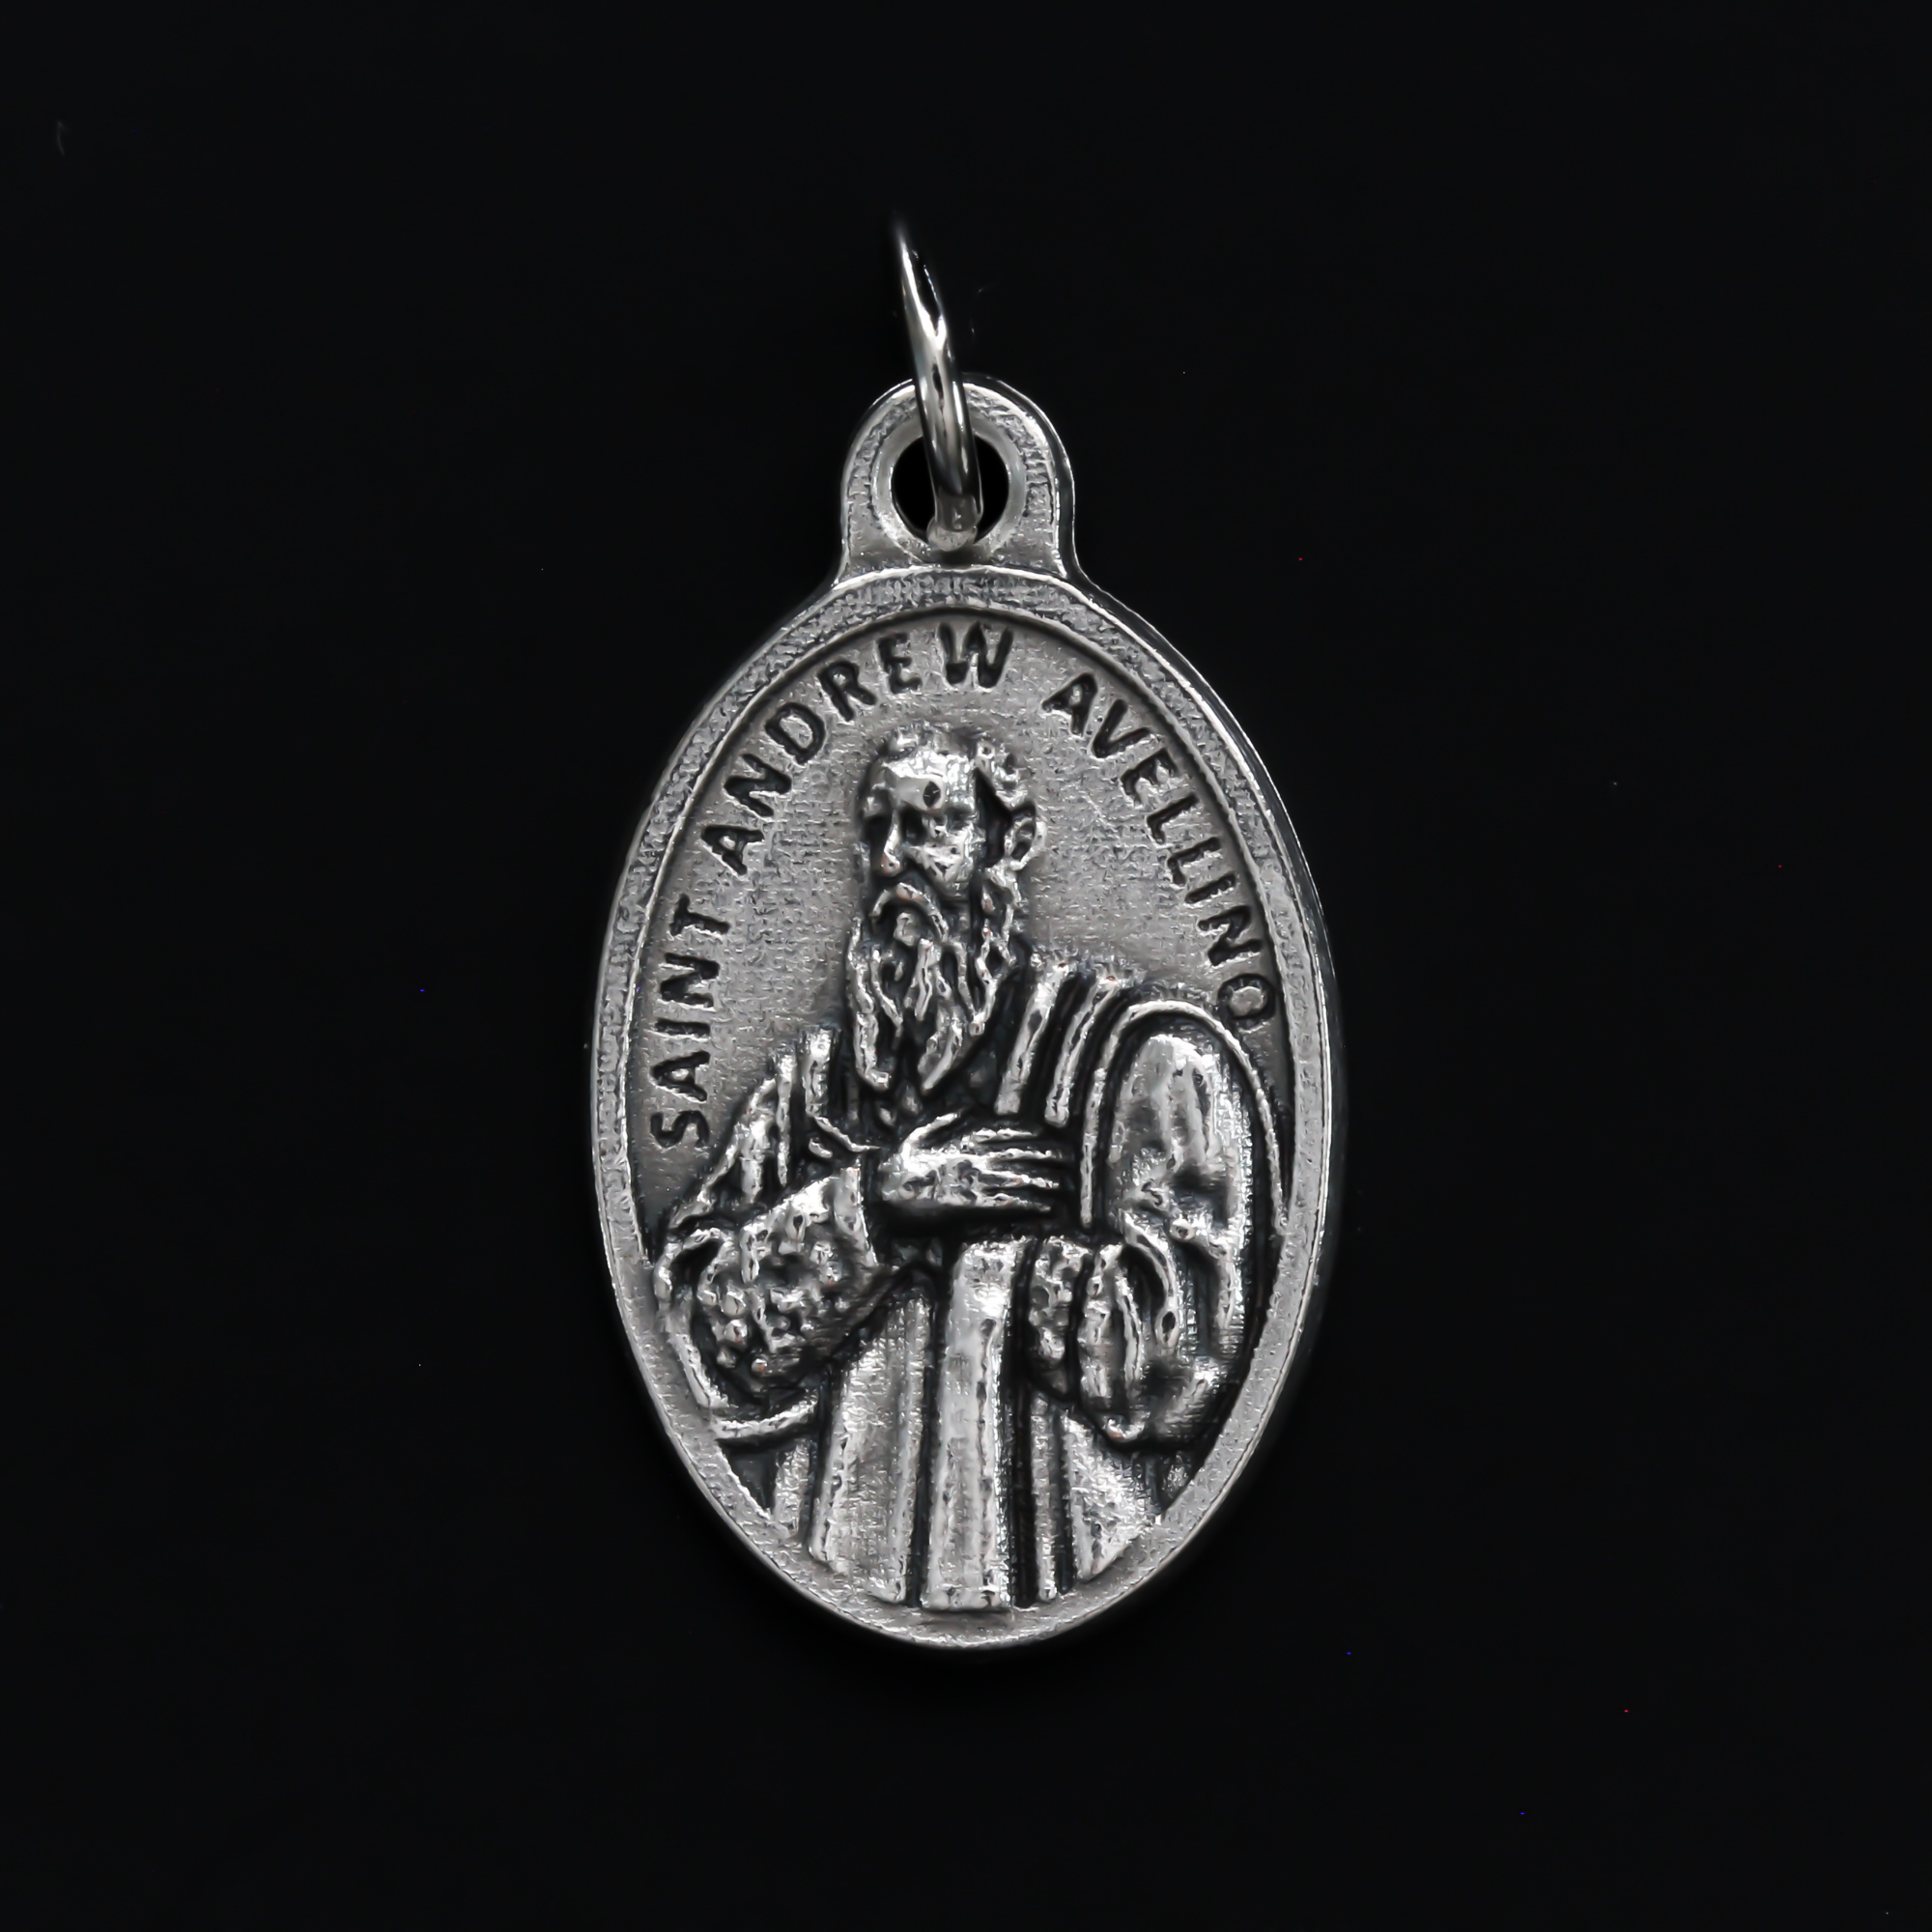 Saint Andrew Avellino medal that depicts the saint on the front and the reverse side is marked "Pray For Us"